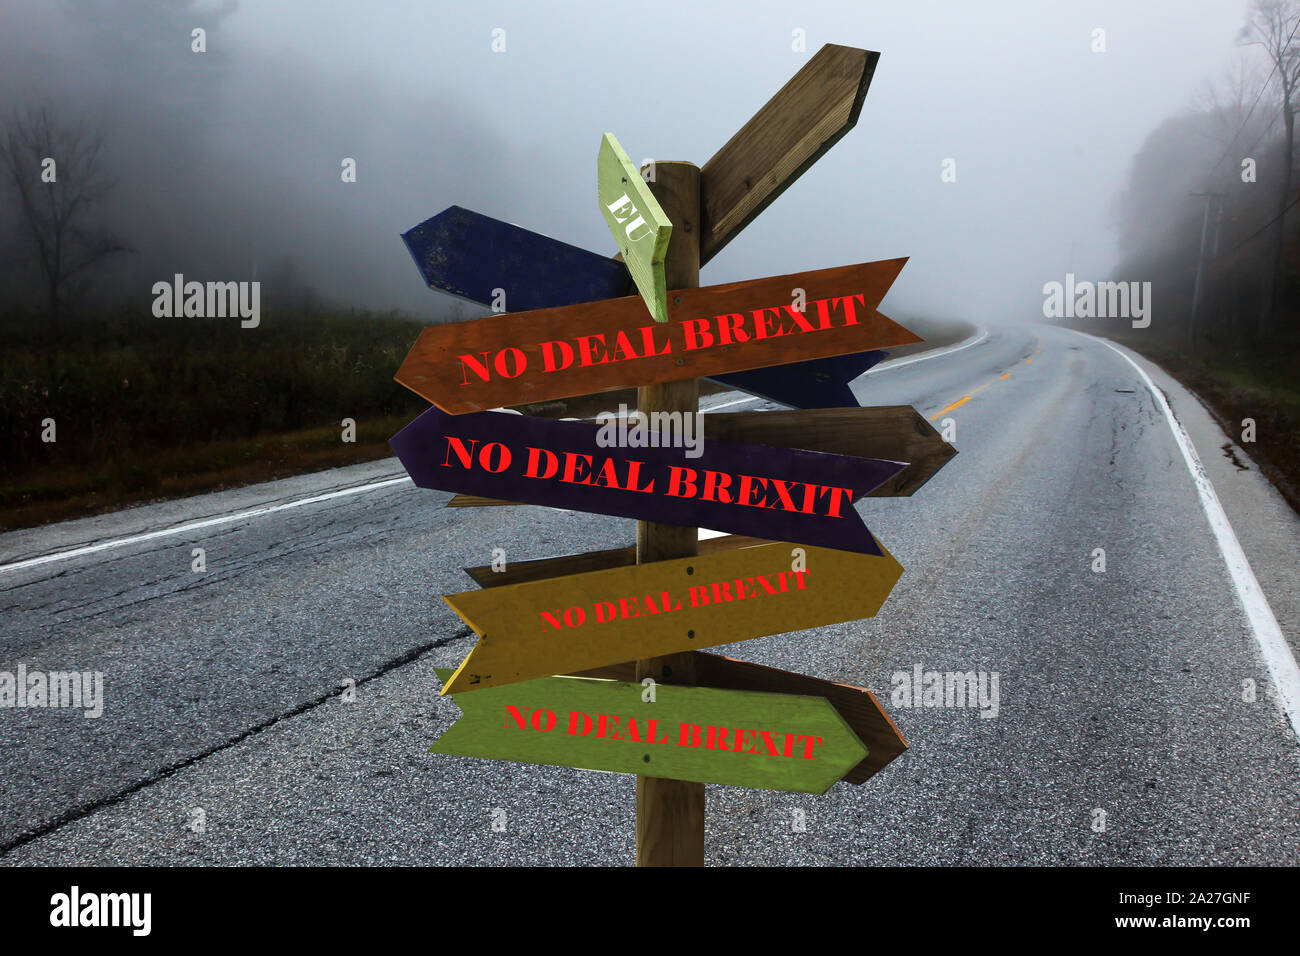 Fogy road with No deal brexit sign Stock Photo